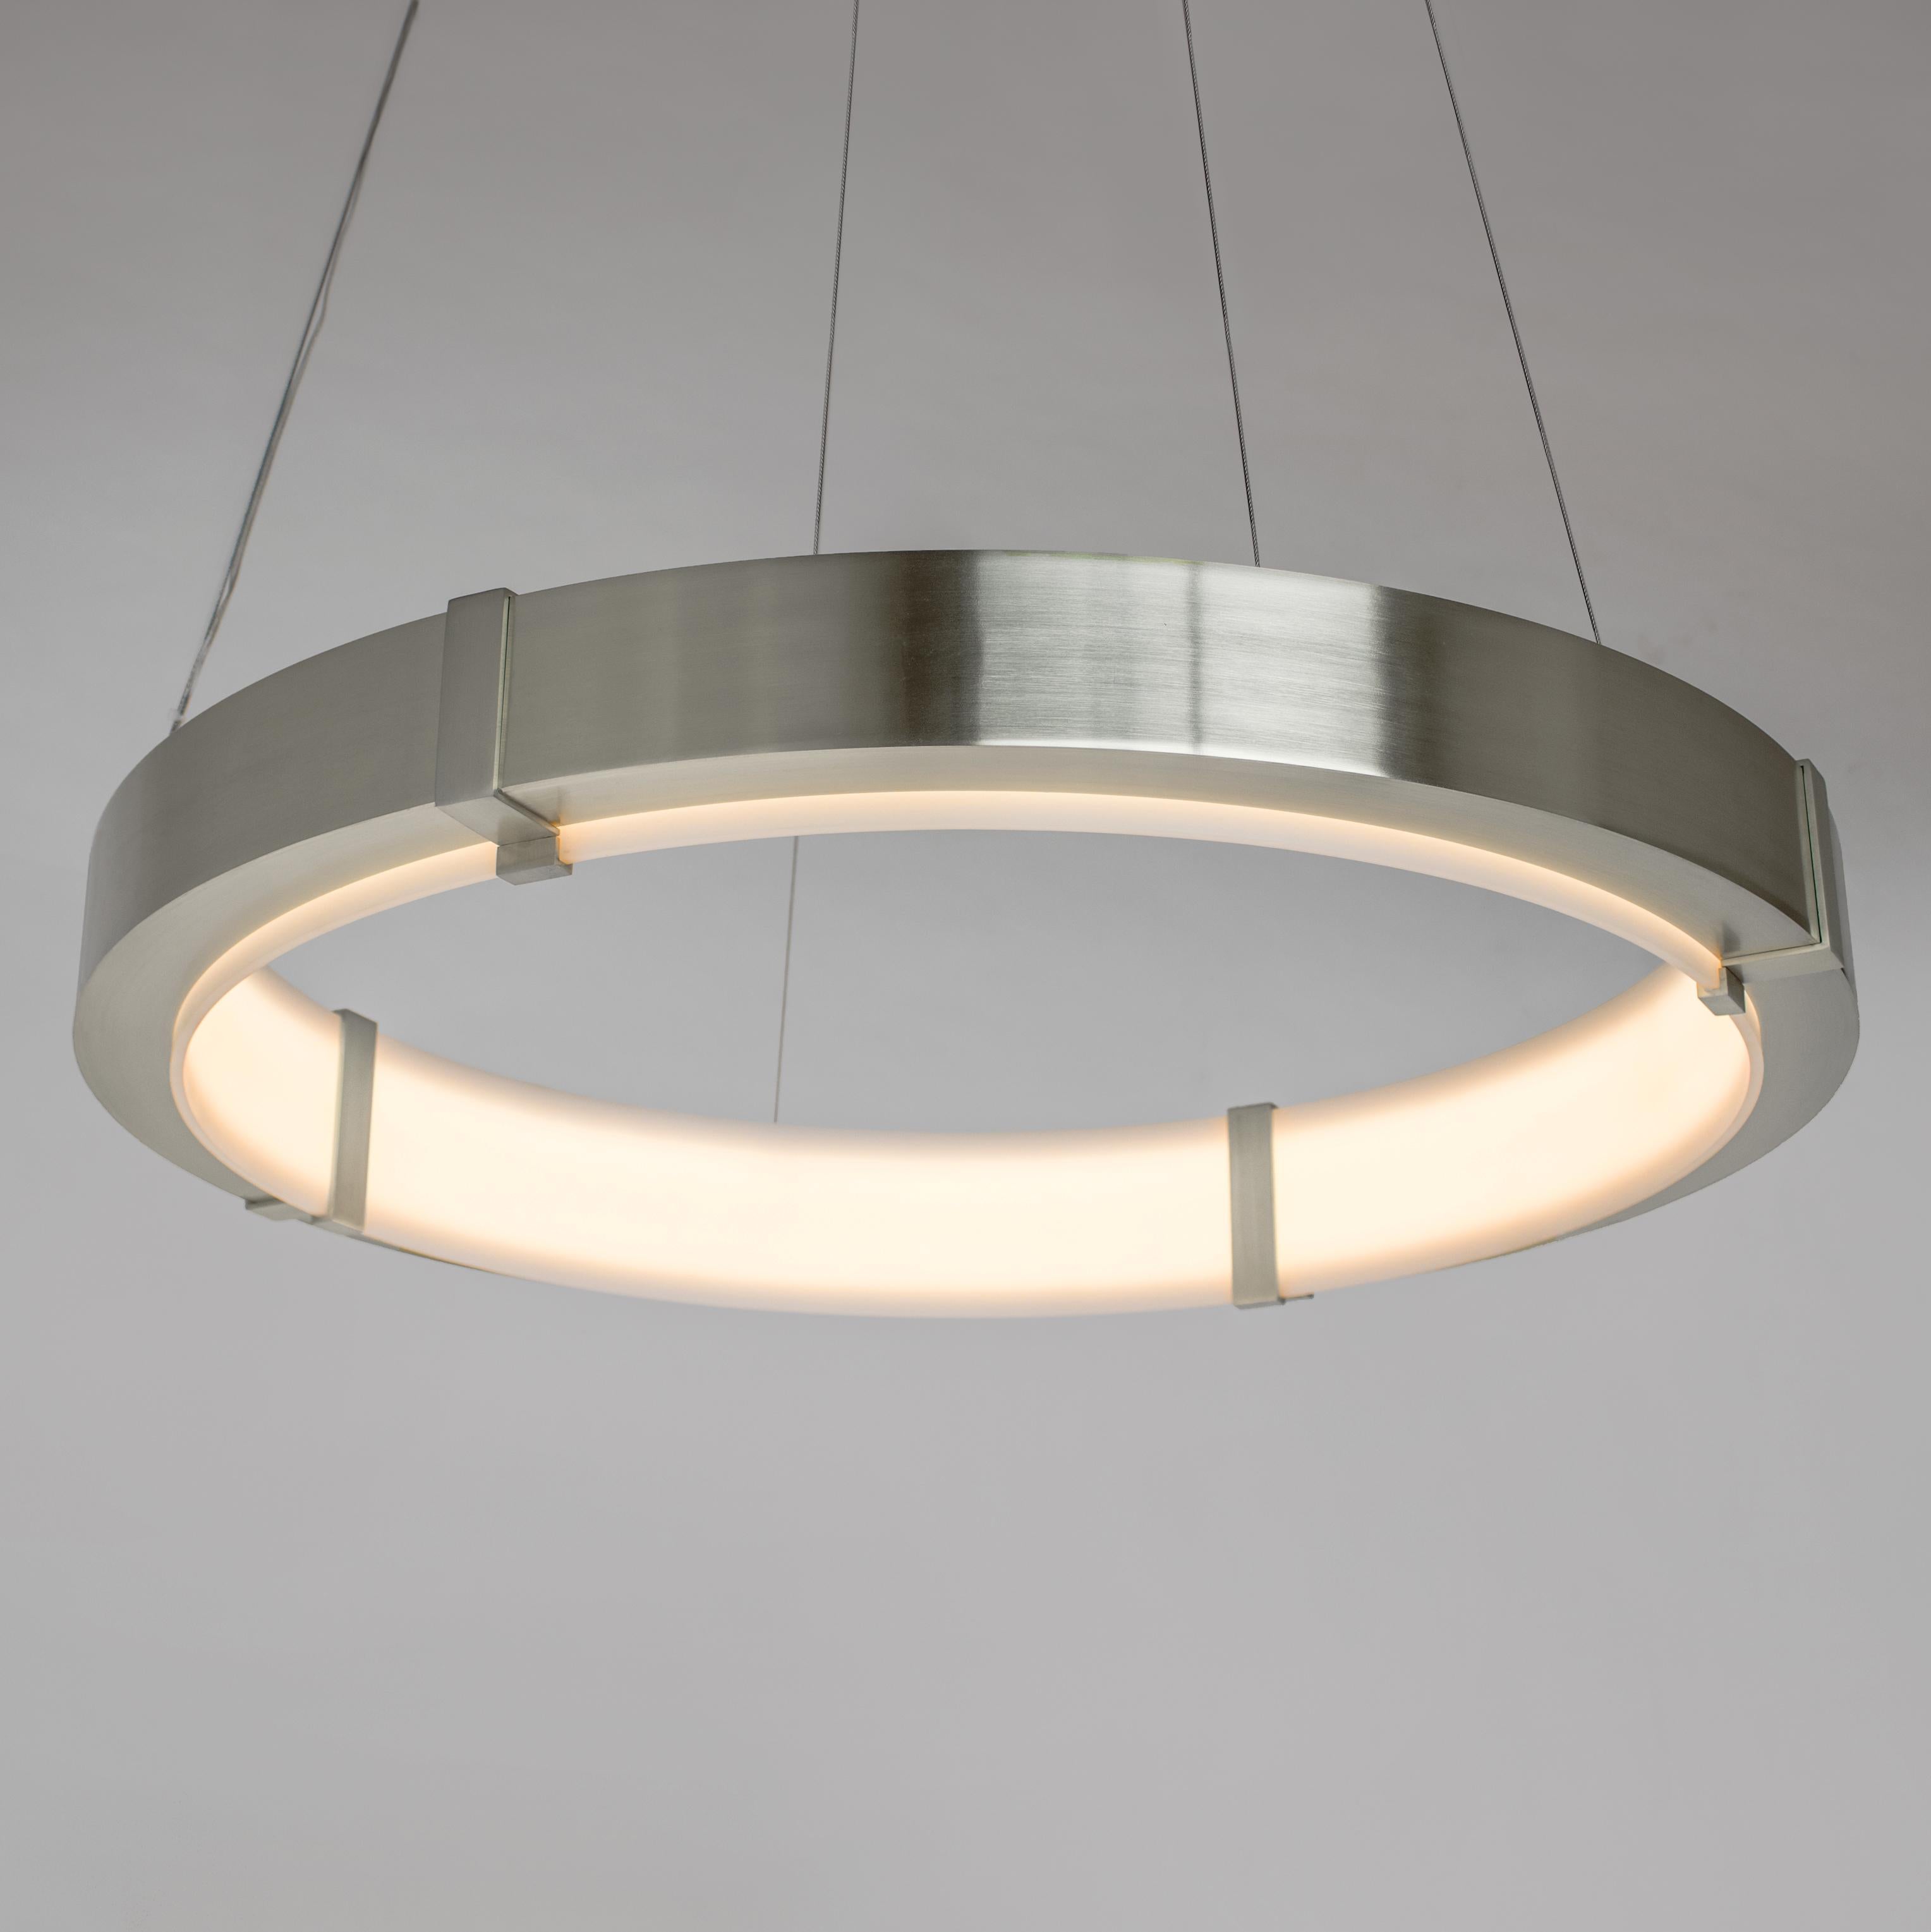 The Aura Pendant emits an elegant glow that is diffused by a satin white acrylic inner ring. The outer ring is composed of cold-rolled steel and is finished with a plated or powder coat finish. The Aura Pendant works beautifully in larger